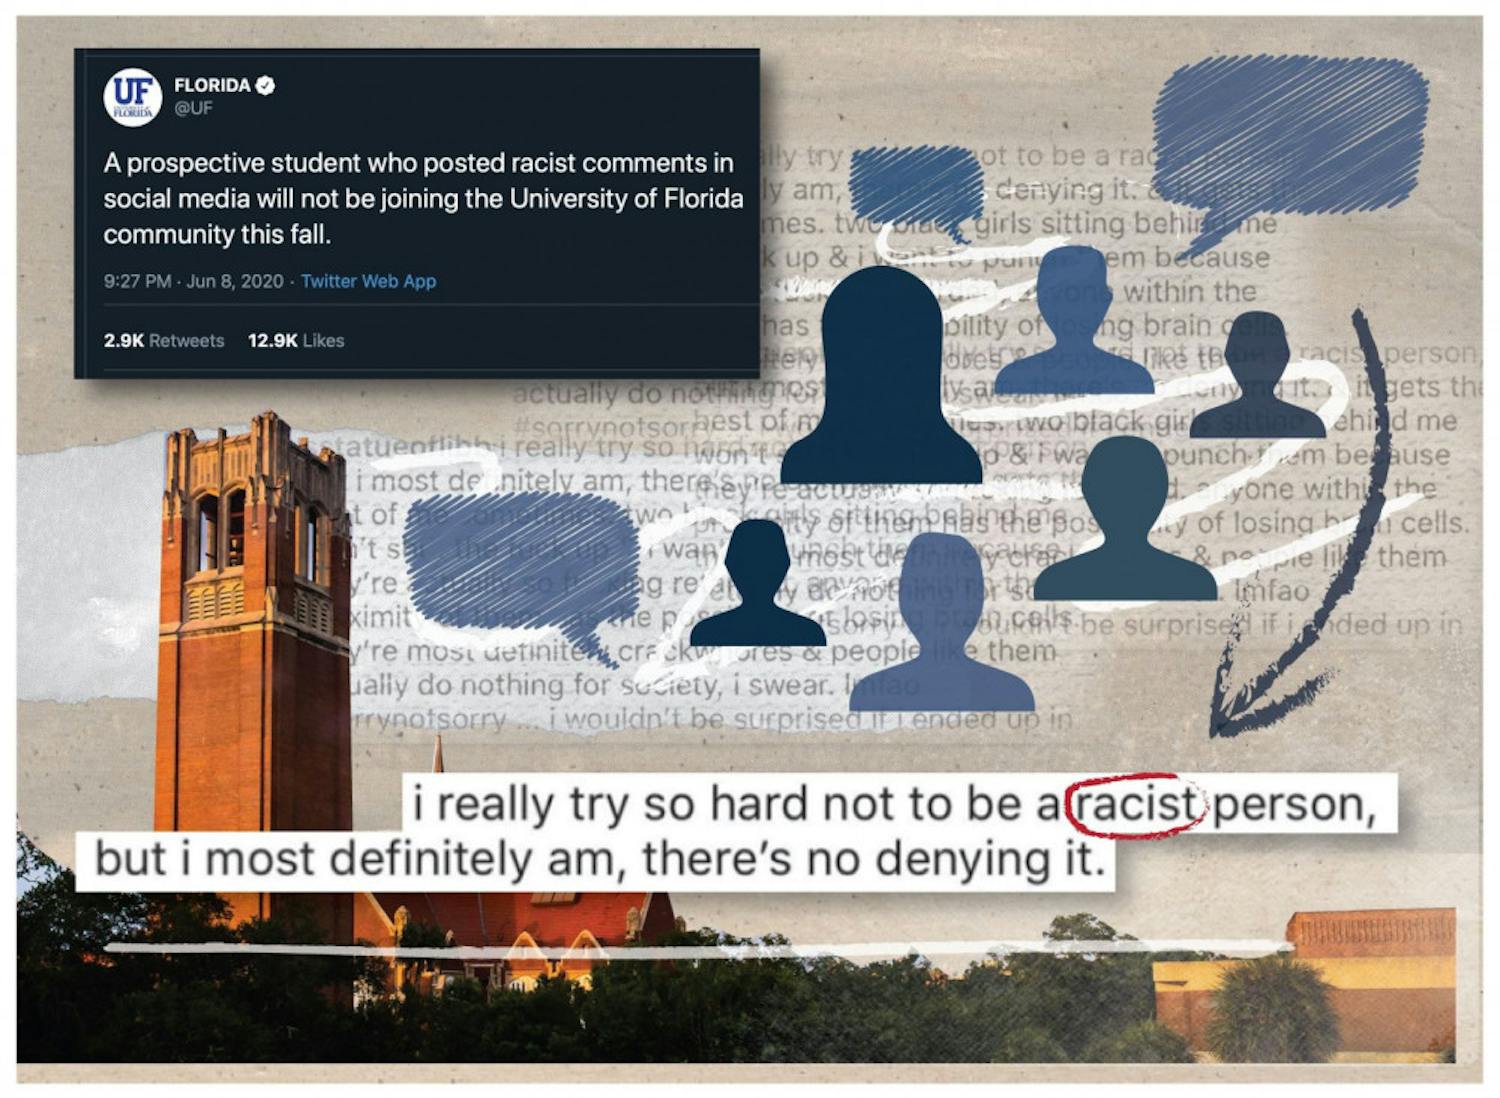 UF announced it was investigating racist comments made by a prospective UF student.&nbsp;